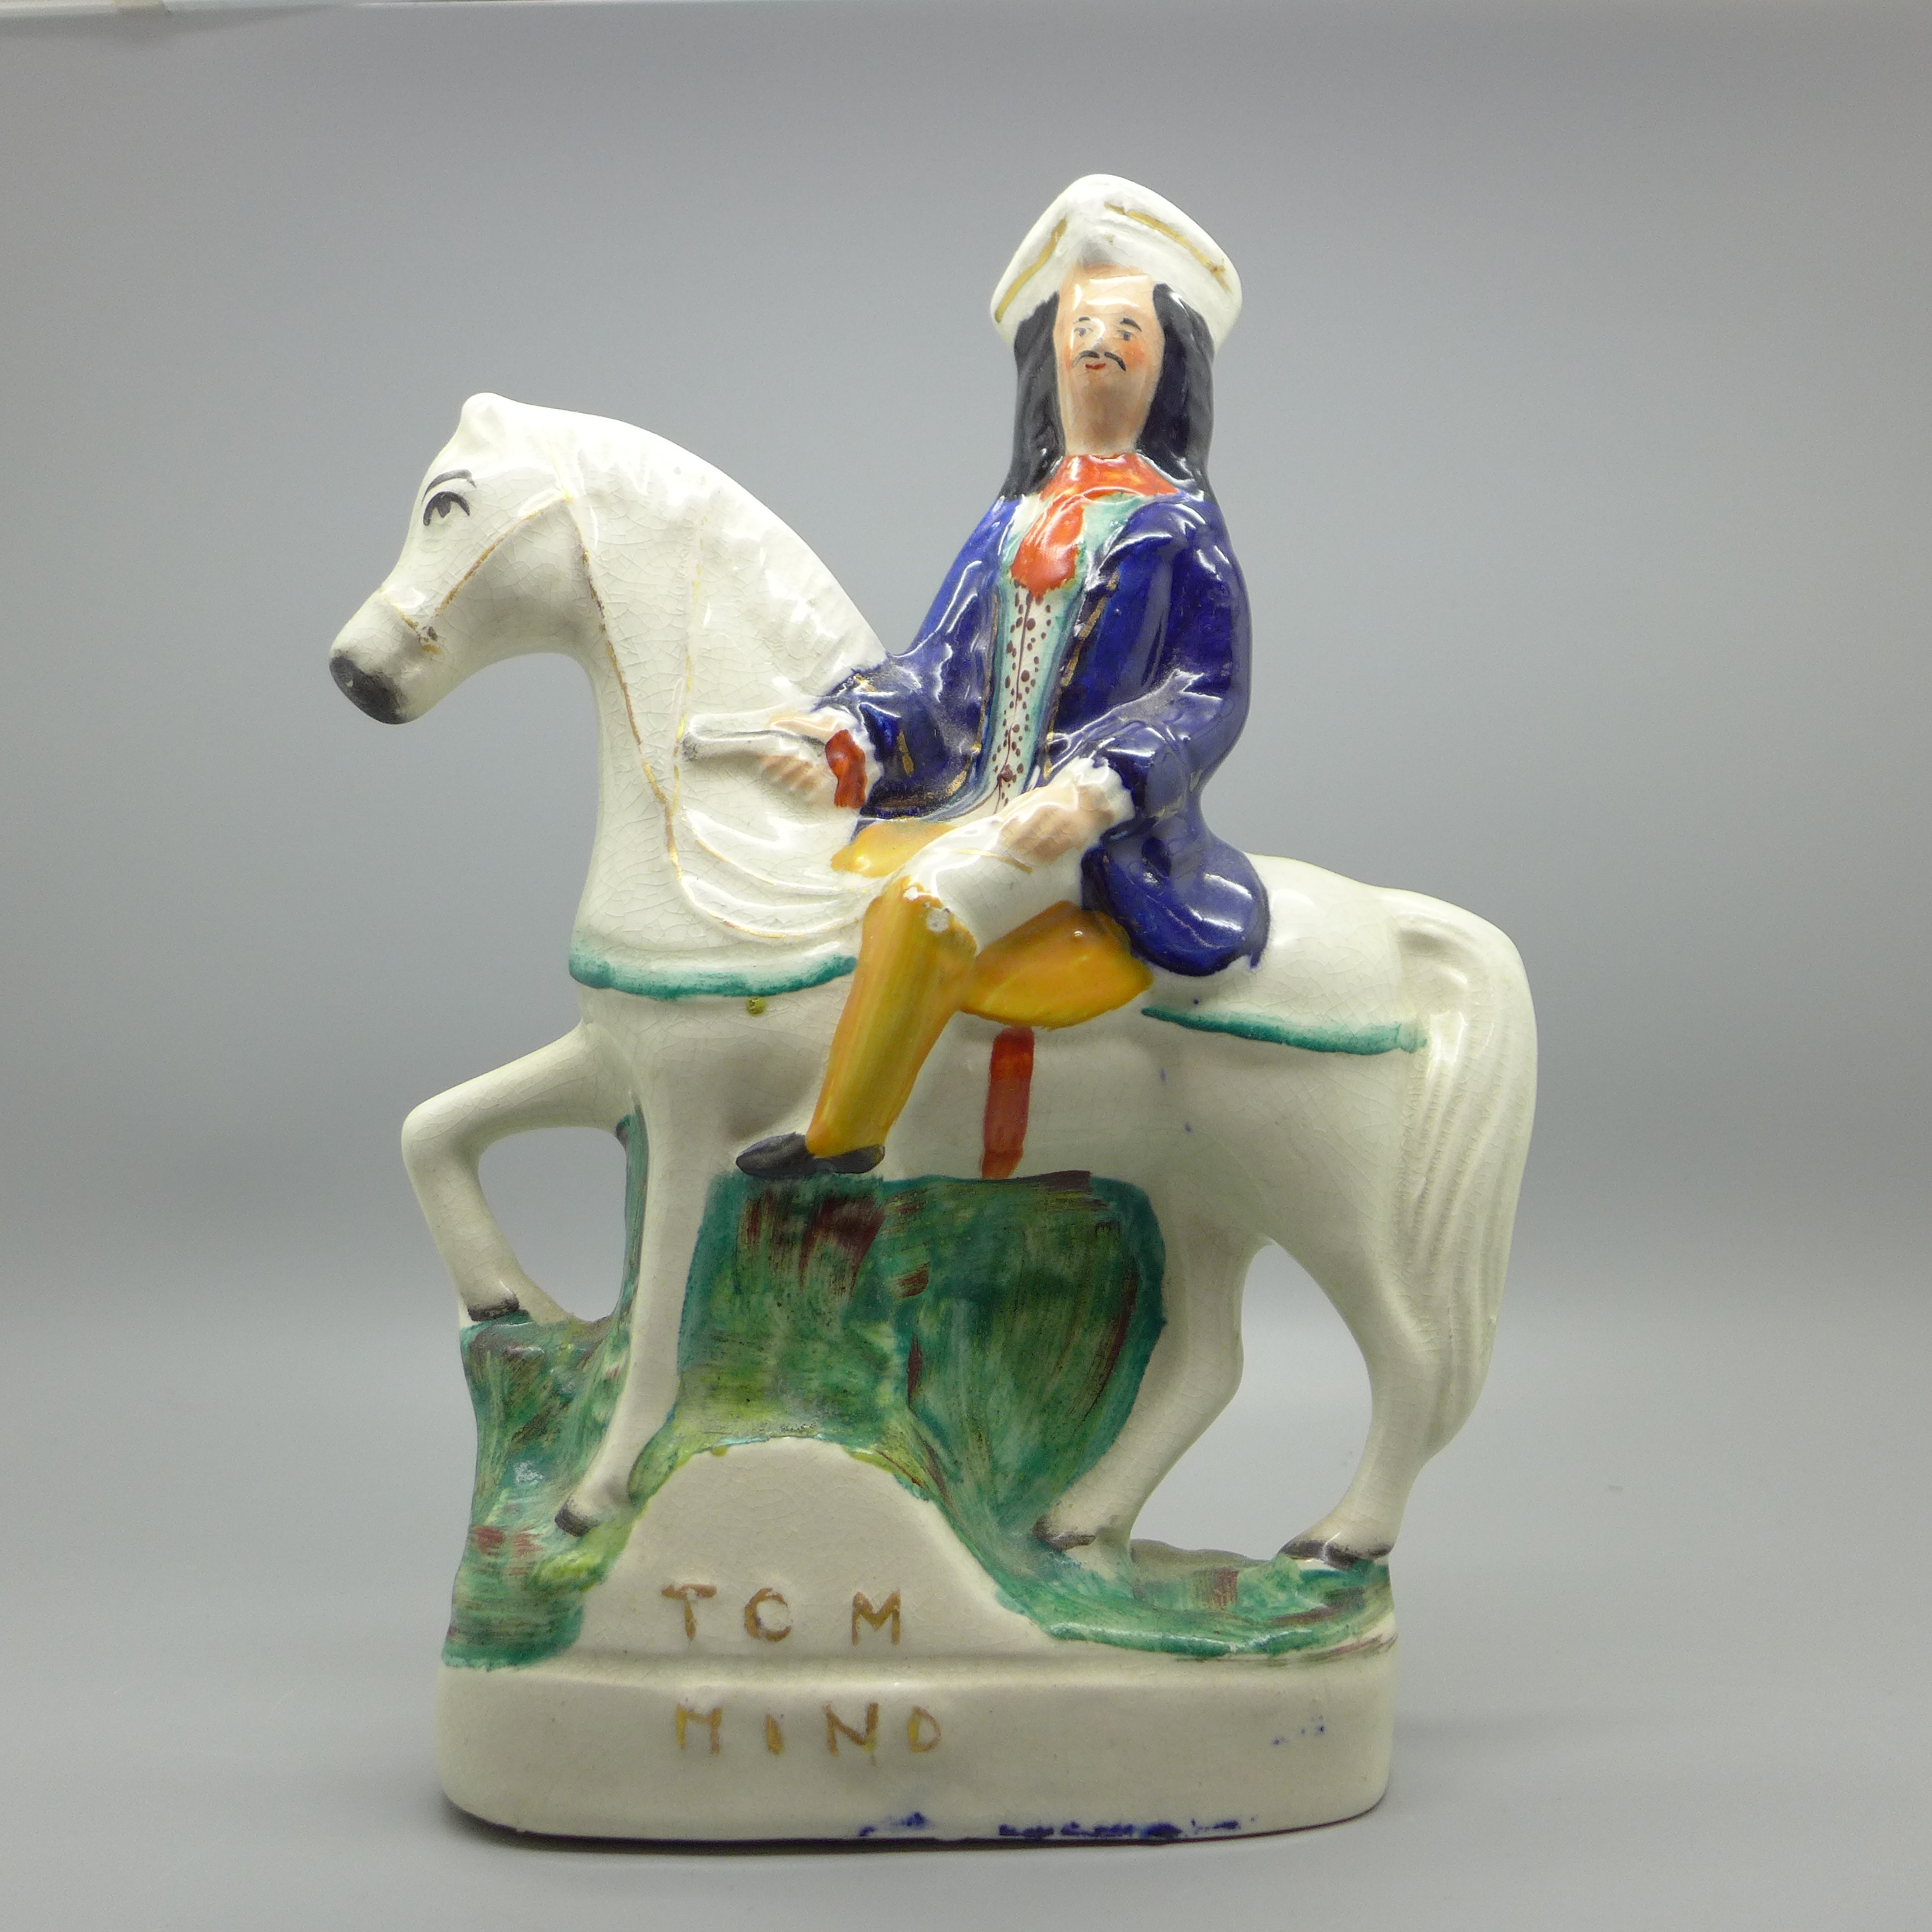 Two Staffordshire flatback figures, Dick Turpin and Tom Hind, 22.5cm